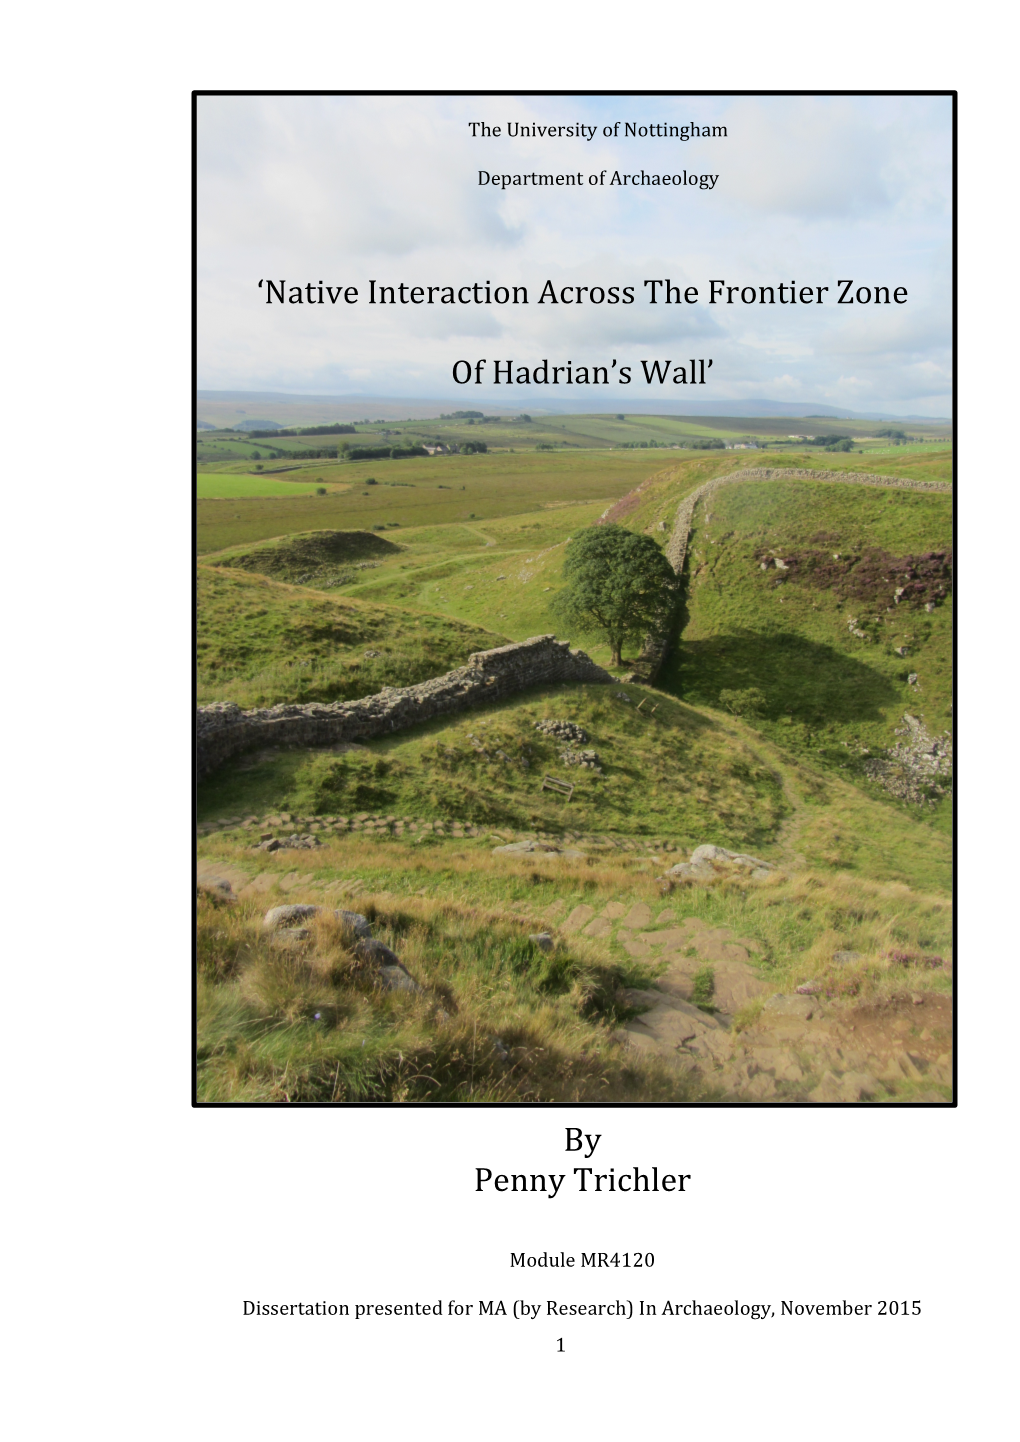 'Native Interaction Across the Frontier Zone of Hadrian's Wall'